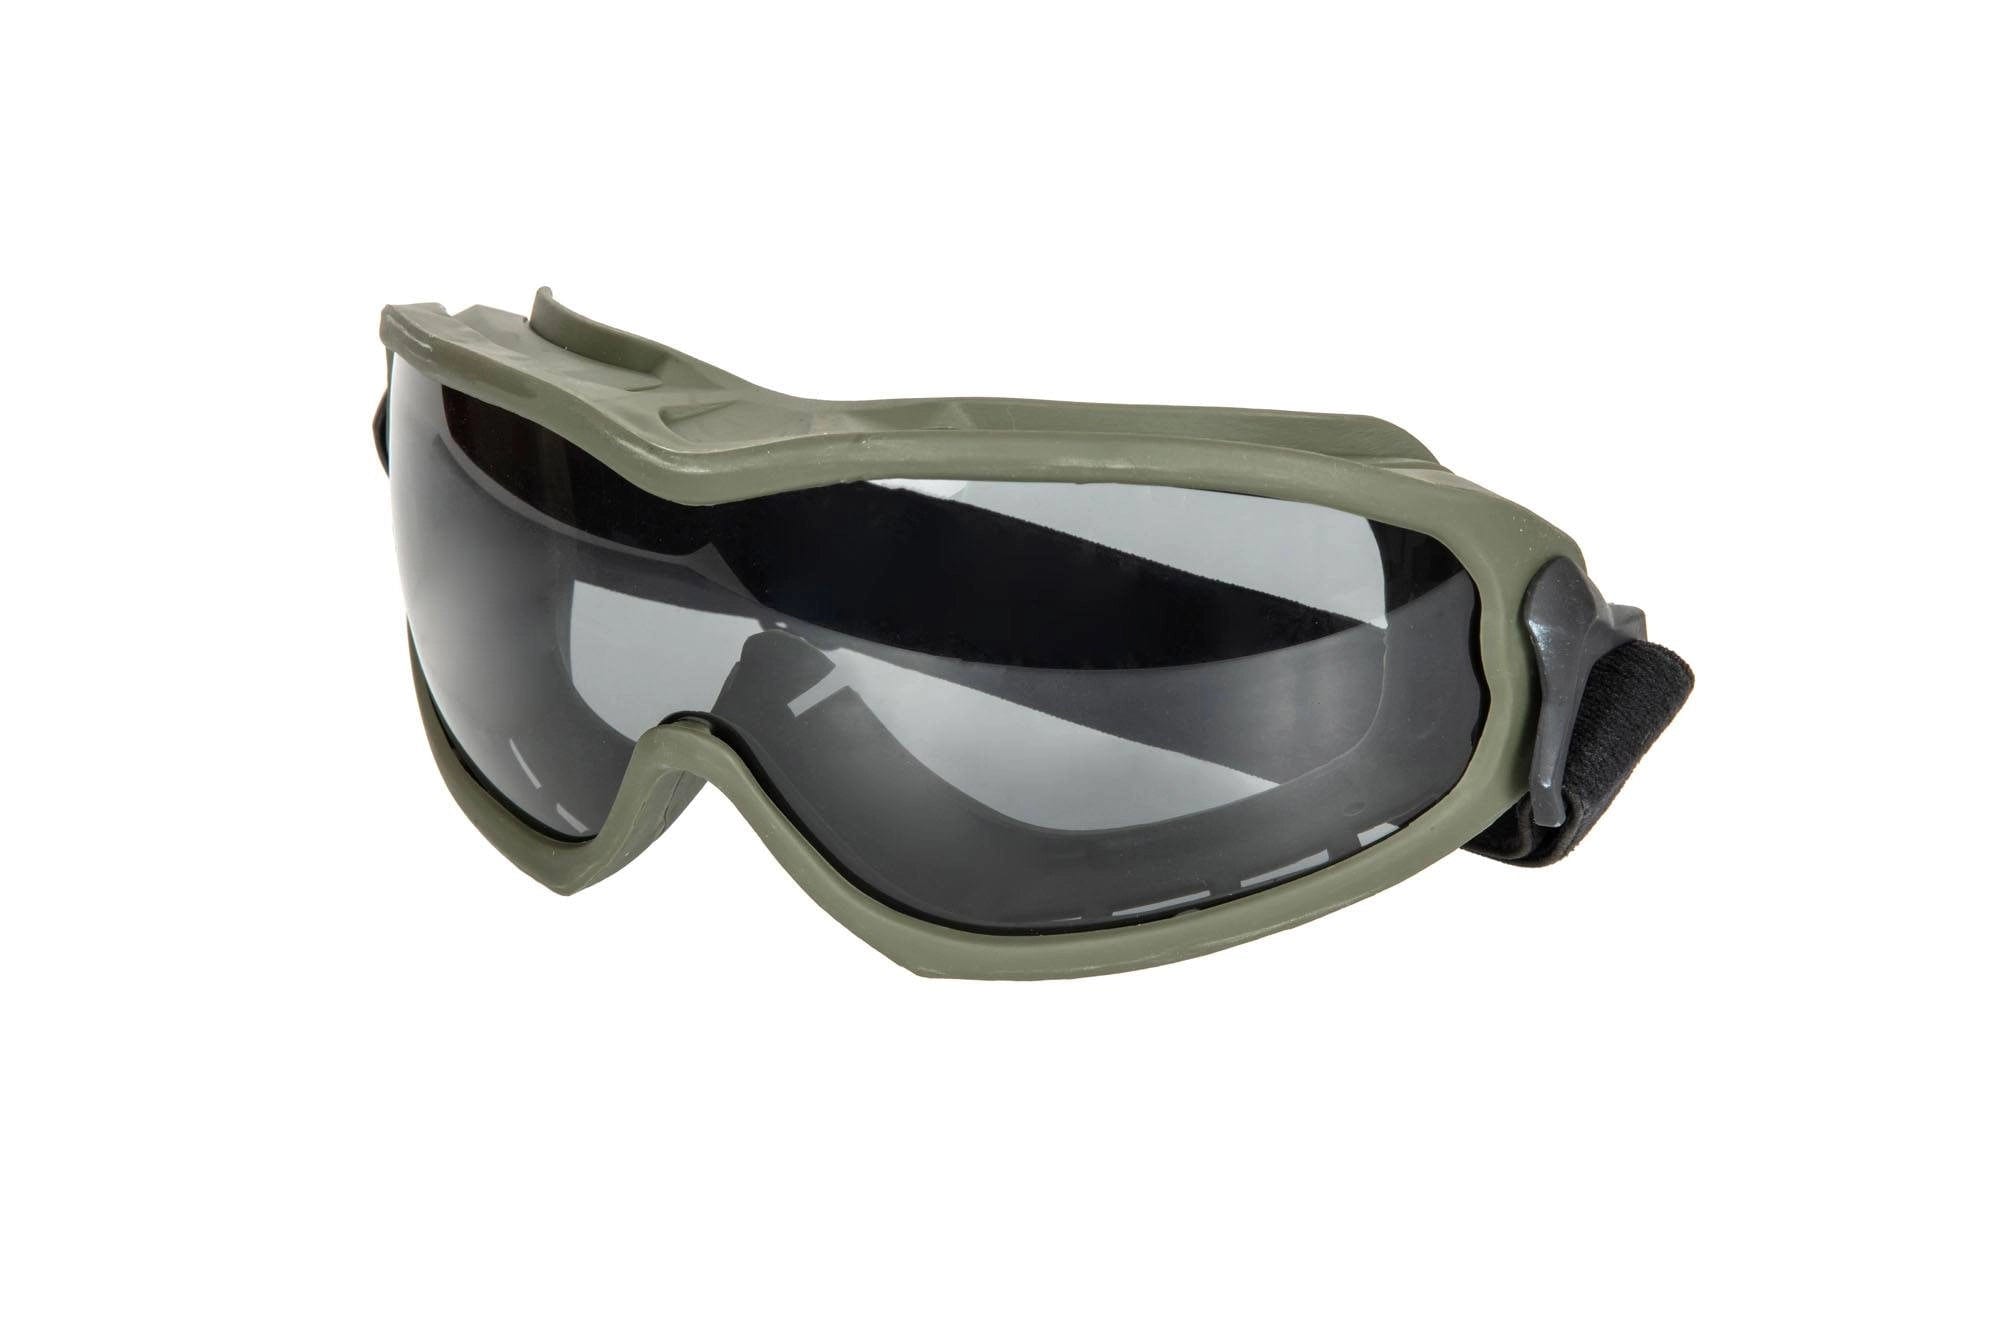 ANT Tactical Goggles - Olive Drab